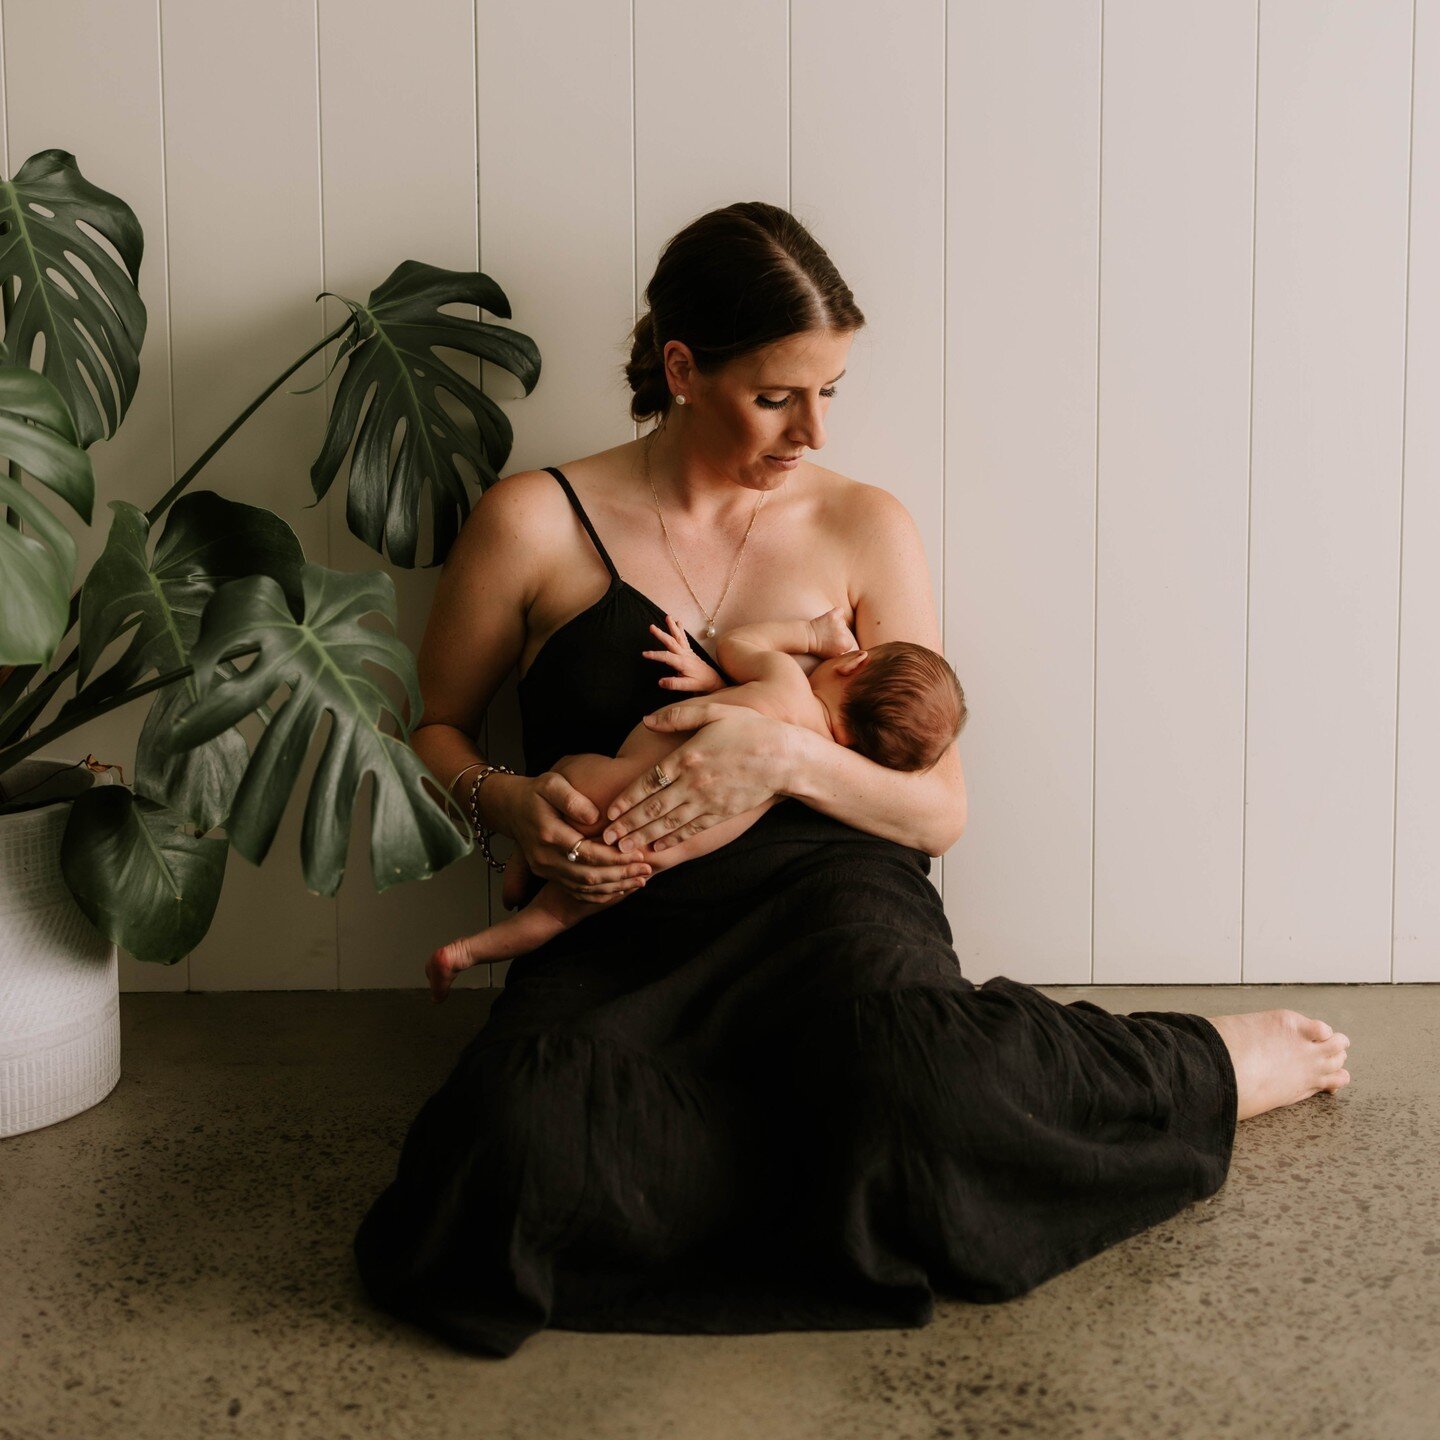 Quiet moments in those precious early days, captured by @_wanderingsoulphotos, shot in our daylight studio 👌
.
.
.
.
.
#candidchildhood #newbornphotography #breastfeeding #studiophotoshoot #studiohire #daylightstudio #naturalmoments #newbornphotogra